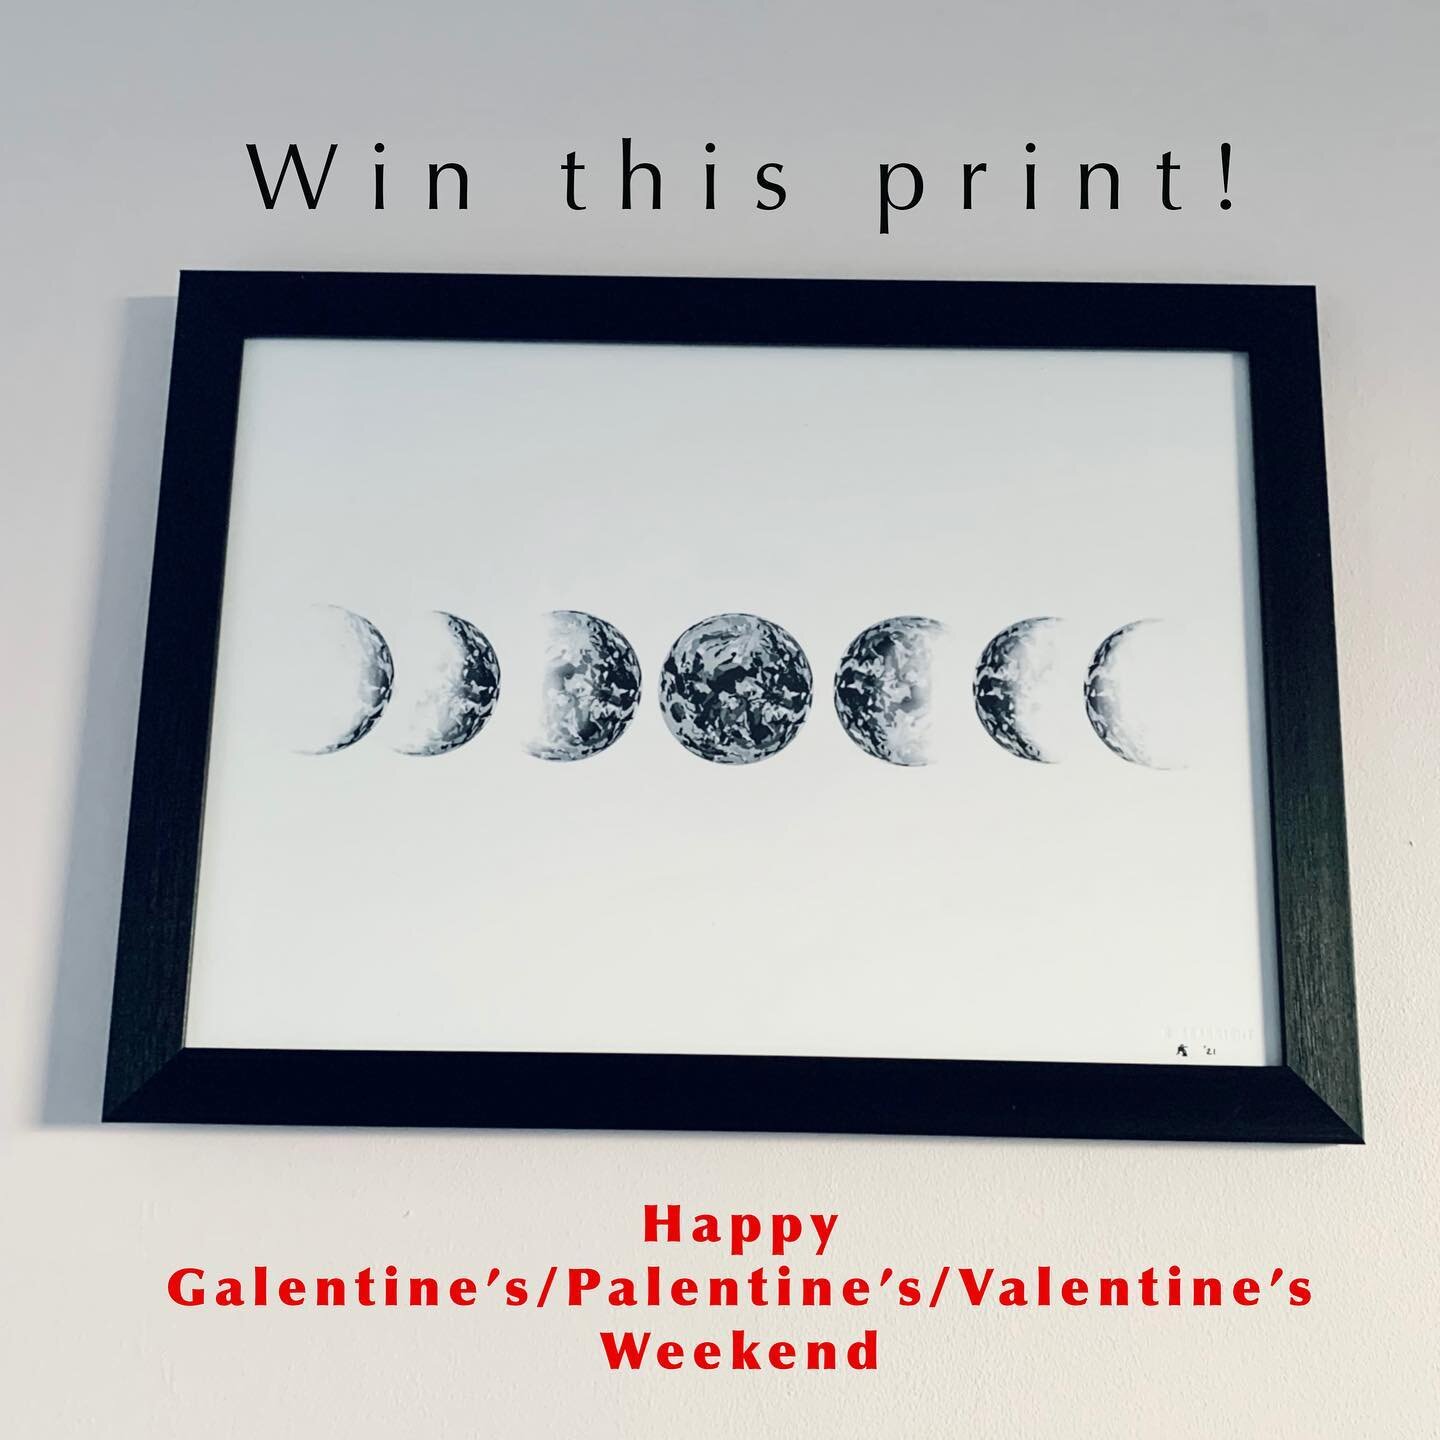 Giveaway time❣️ Win this limited edition Moon Phase Print.  Kicking off Galentine&rsquo;s/ Palestine&rsquo;s/ Valentine&rsquo;s Weekend! 

To enter: ▪️Follow Me @robynseabrightart ▪️Like this post▪️Tag your Pal, Gal or Valentine❤️ 

Entry Closes 1pm 